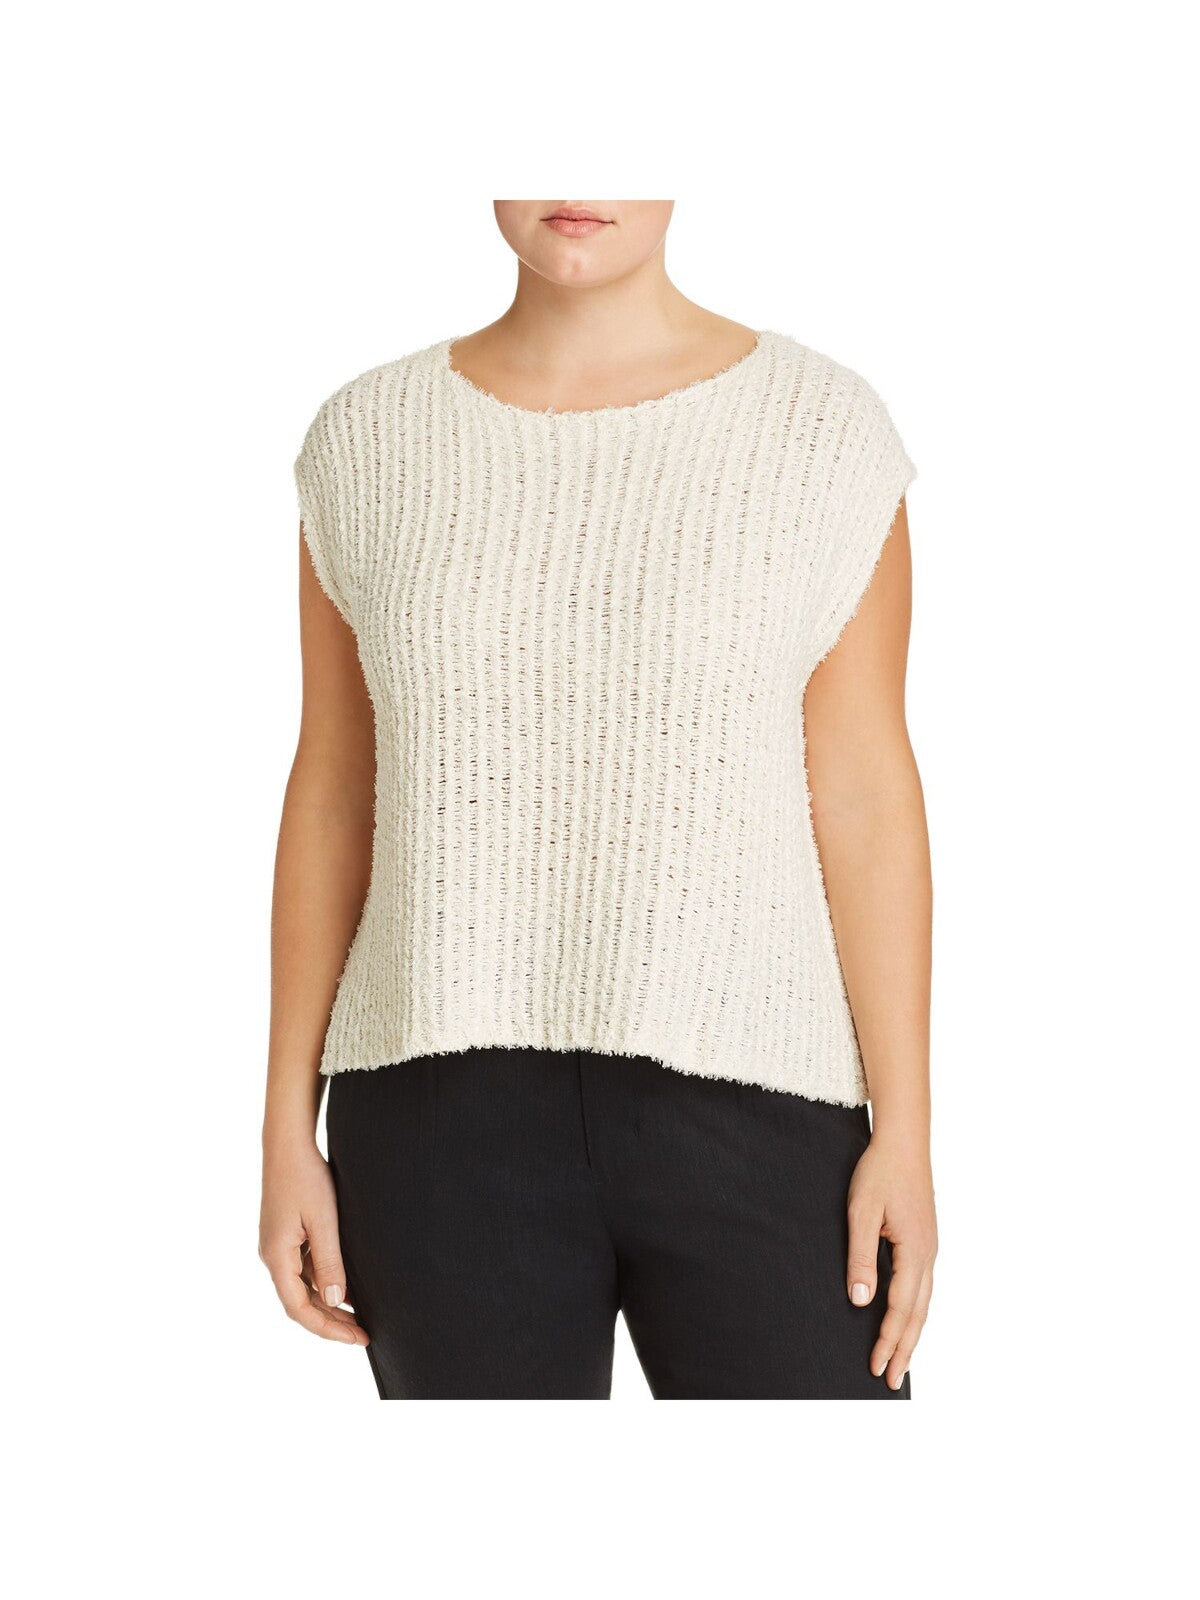 EILEEN FISHER Womens Beige Stretch Ribbed Knit Cap Sleeve Boat Neck Sweater Plus 3X